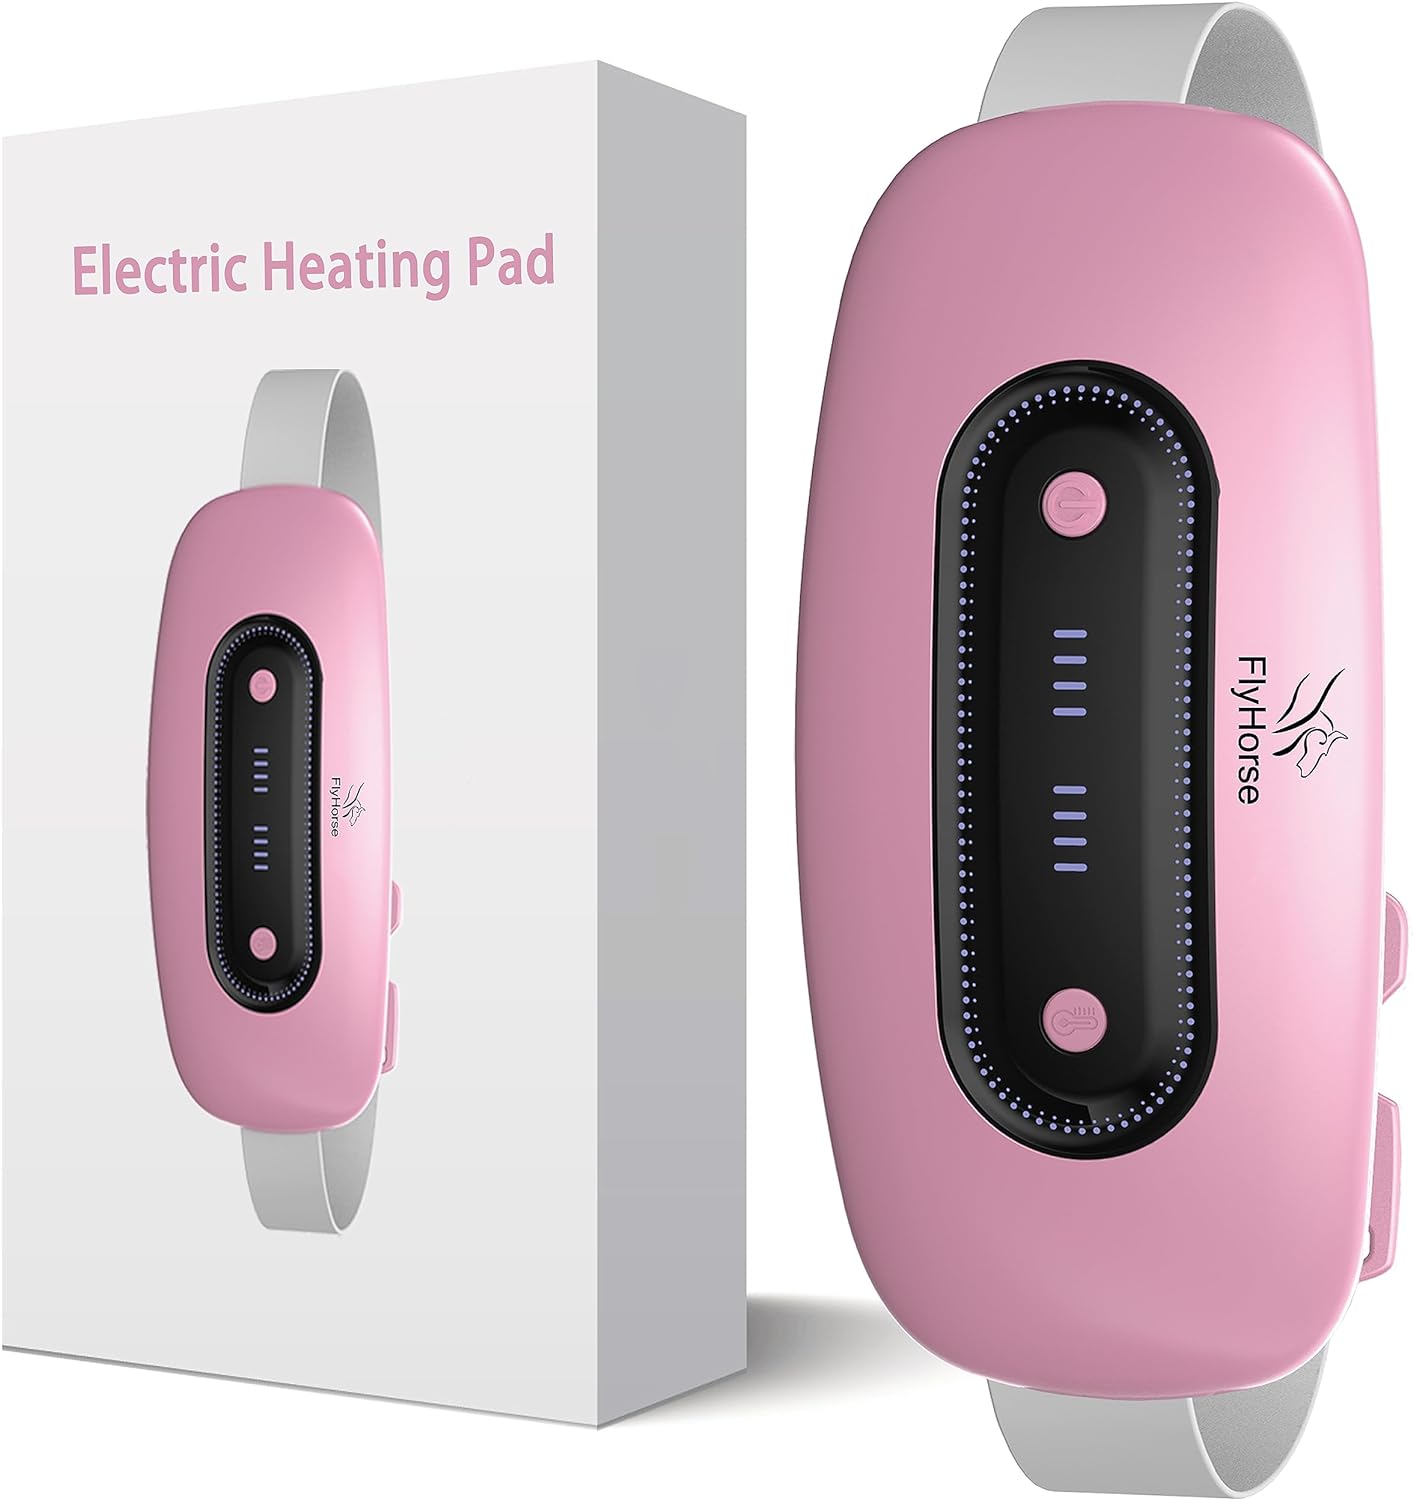 Similar to a disposable heat wrap from the drugstore, but its sturdy and rechargeable. Heats up quickly and the massage option works fine. The back side is soft and the strap seems securely attached. I generally just use it sitting down without needing the strap, but its great to have that option. Seems will certainly last a while and at a very affordable price, especially compared to the price of disposables.